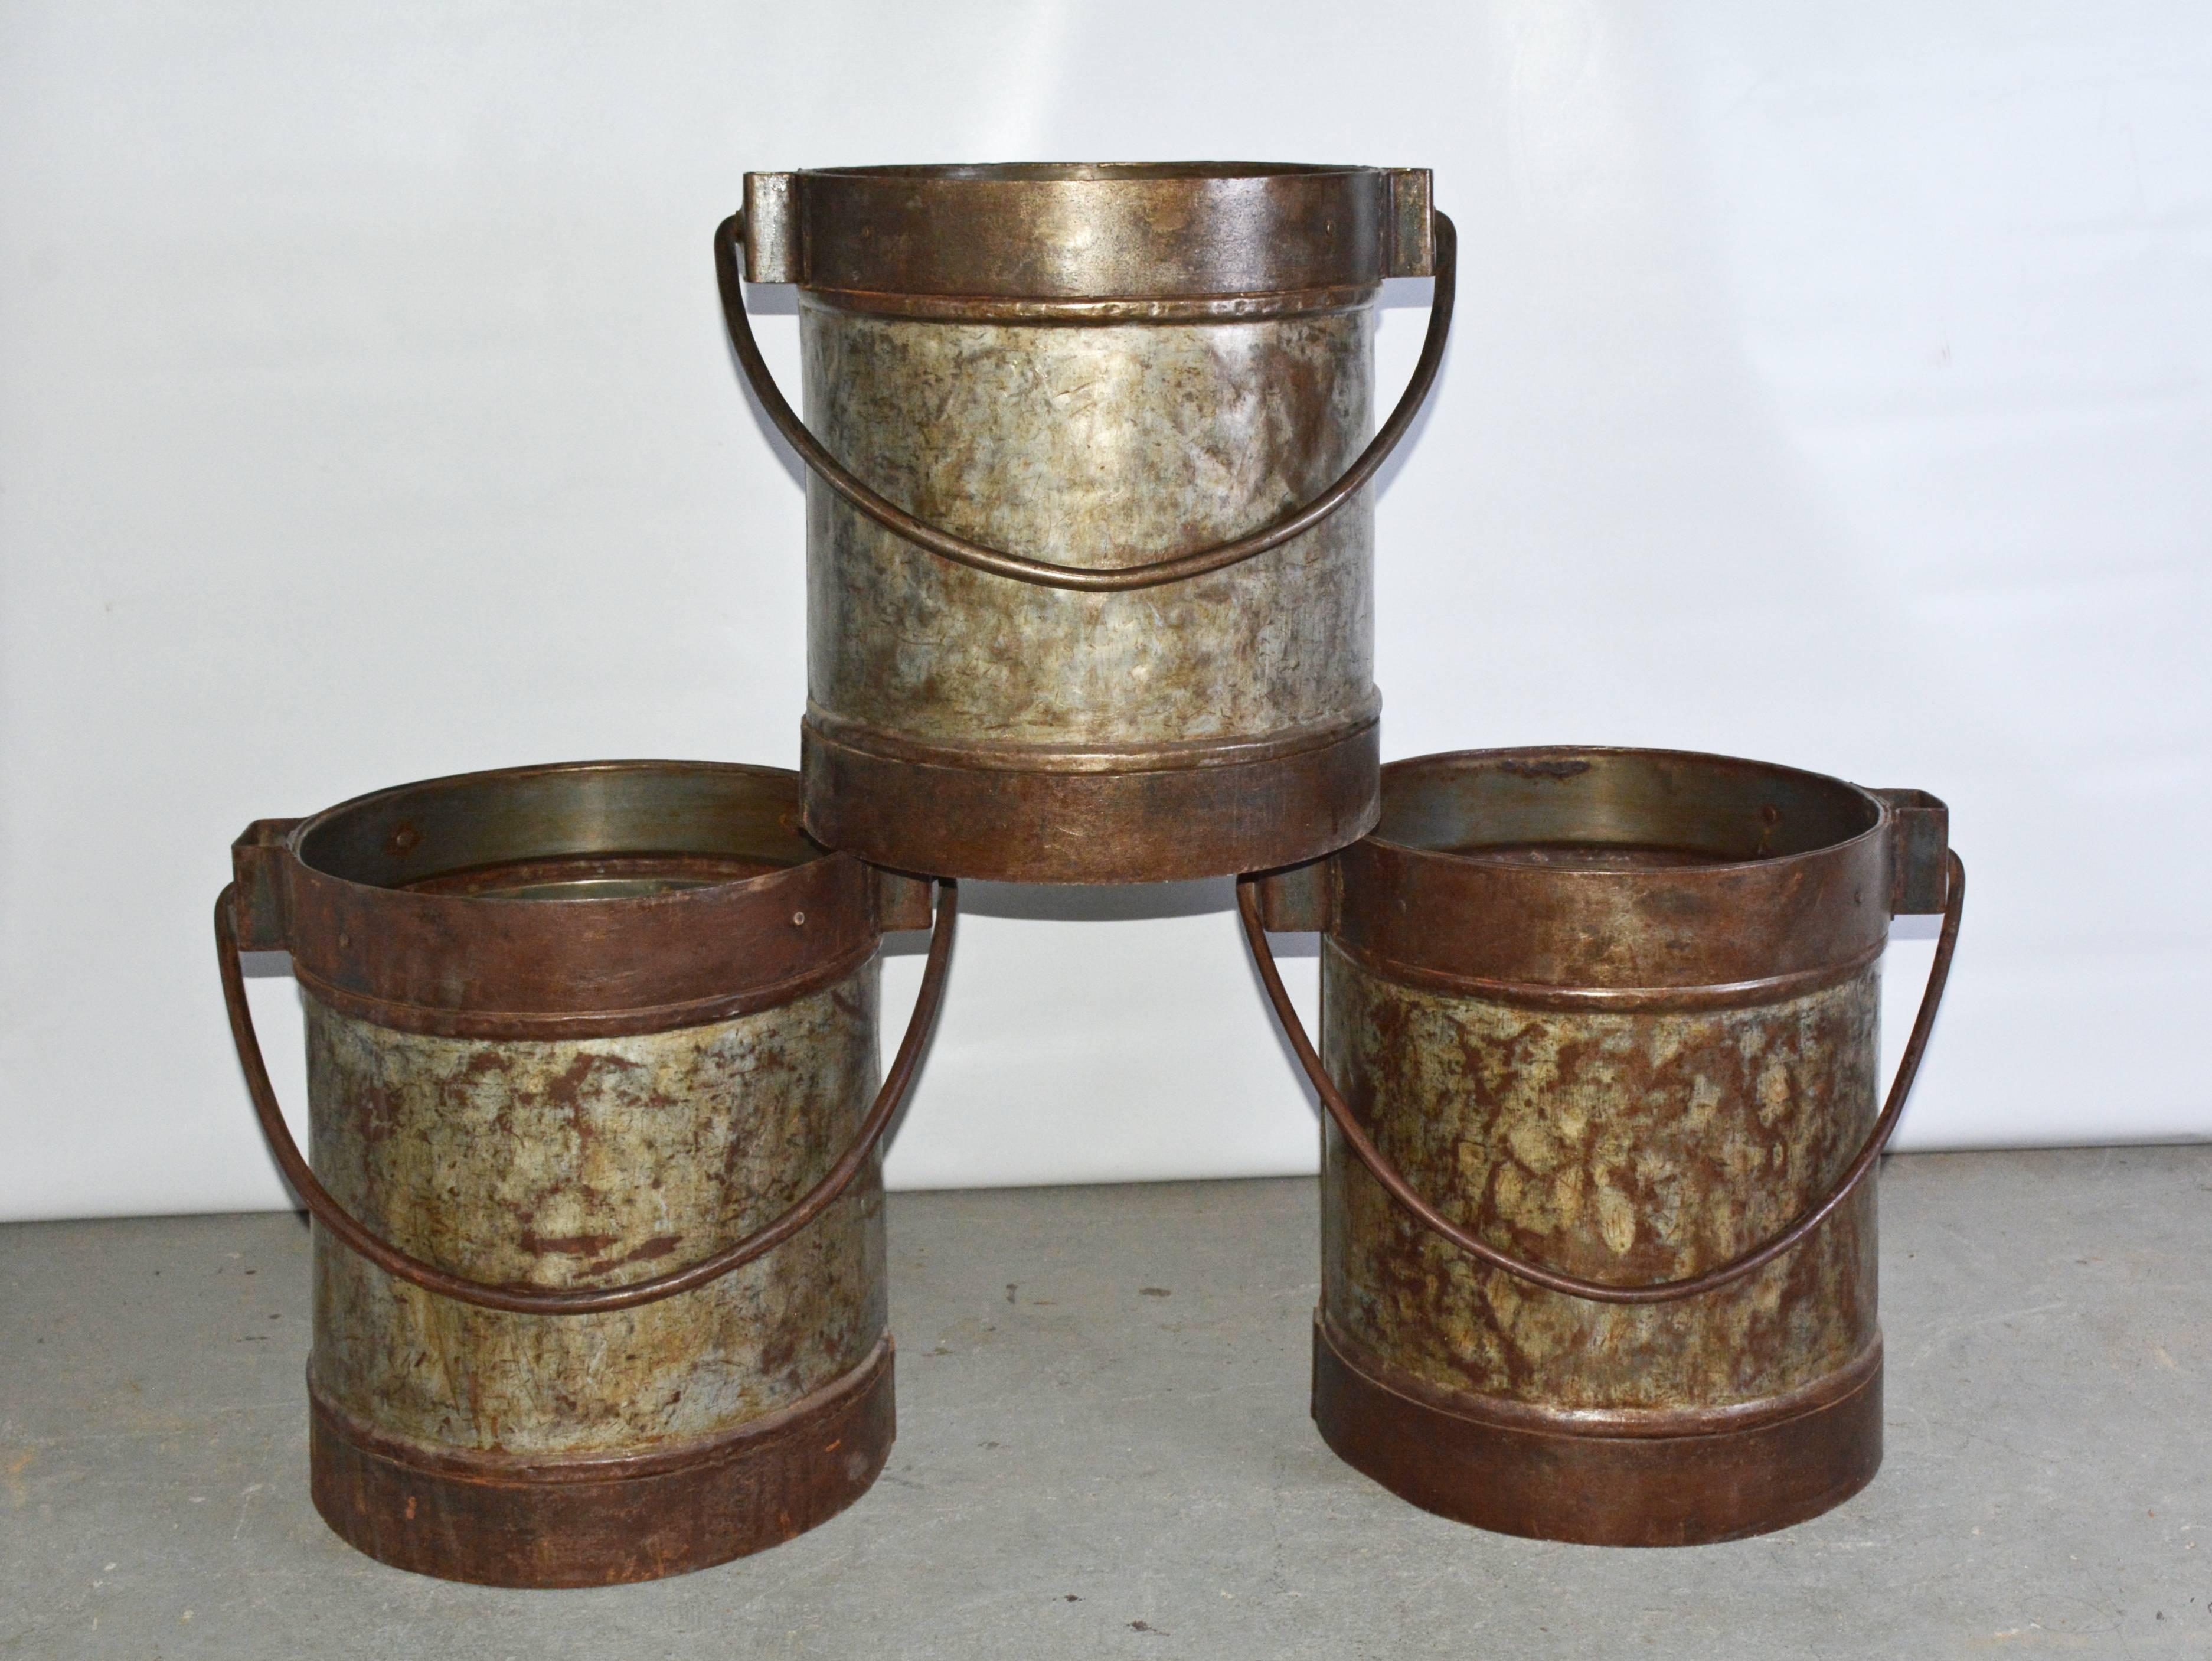 Wonderful antique Industrial iron metal bucket can be used for logs, kindling, fireplace tools or put a piece of glass, wood or stone on top and use as a side or end table.  Two matching buckets are available.  Price is for one bucket.
Measures: